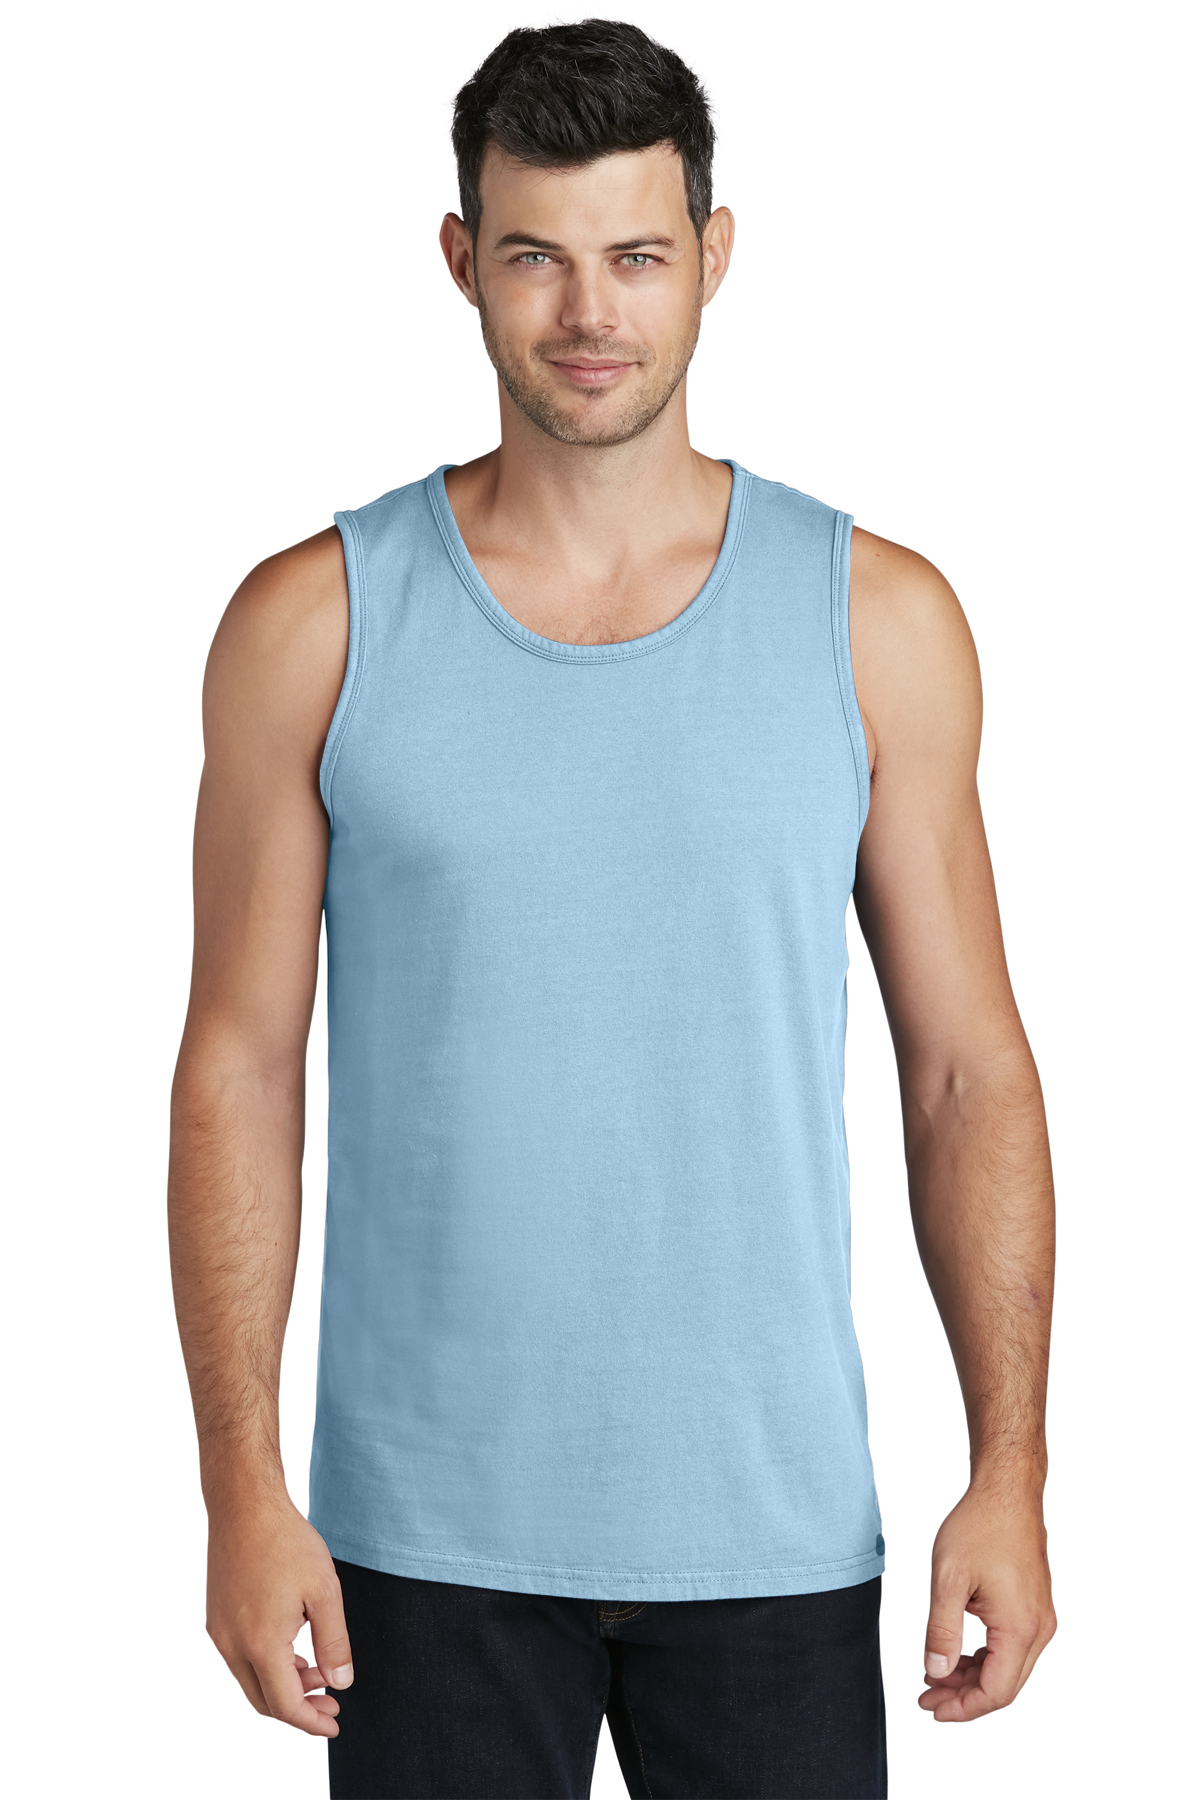 Port & Company Beach Wash Garment Dyed Tank Top   Product